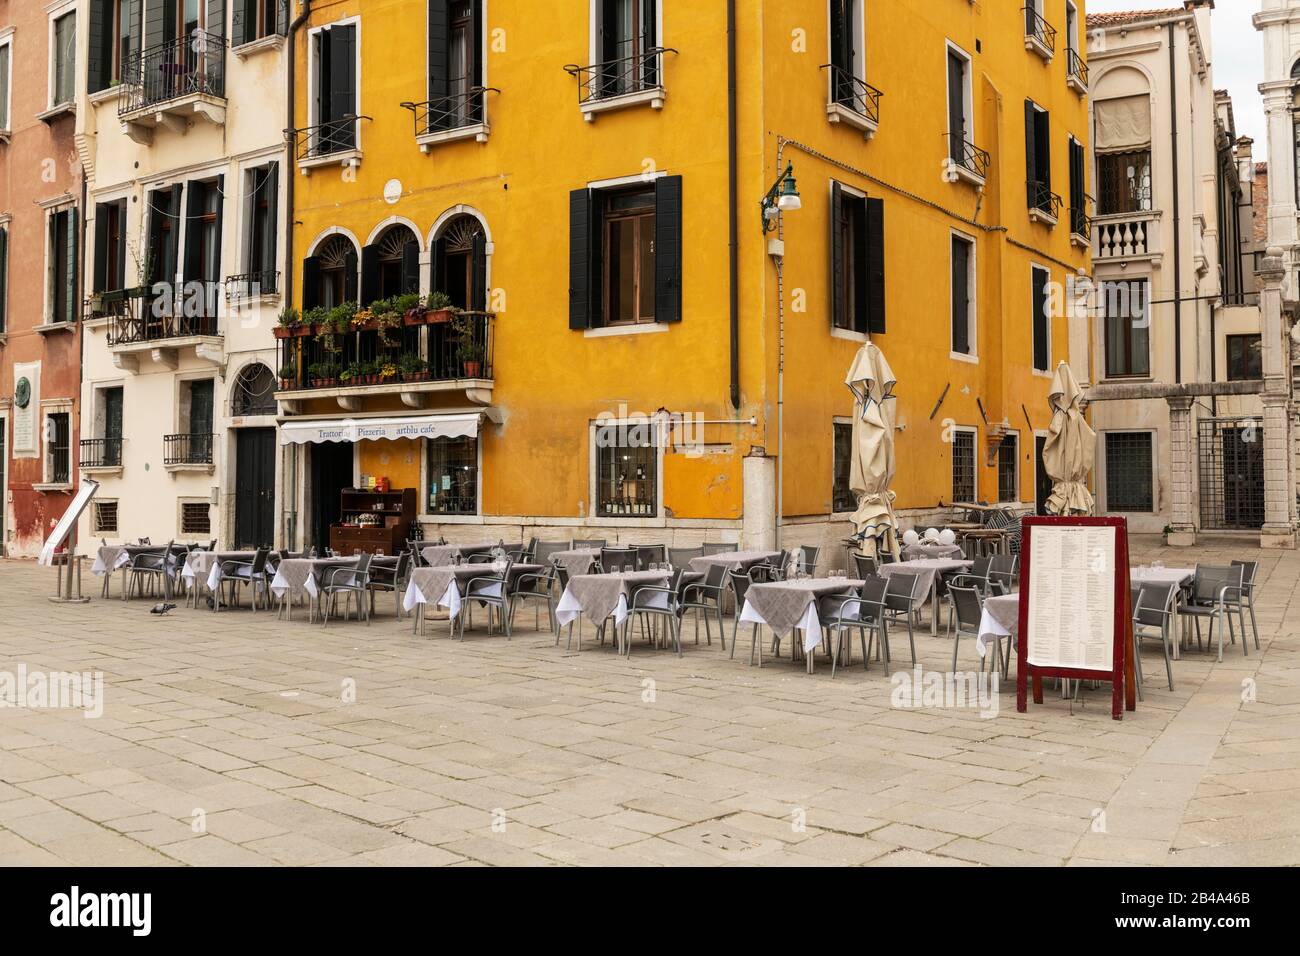 Venice, February 25th - March 3rd. 2020: Bars and restaurants  are suffering from a drastic drop in business as the Coronavirus epidemic scares tourist from visiting Vence and cancelling their trip. Restaurants and bars are laying off members of staff as trade has dropped off dramatically. Stock Photo